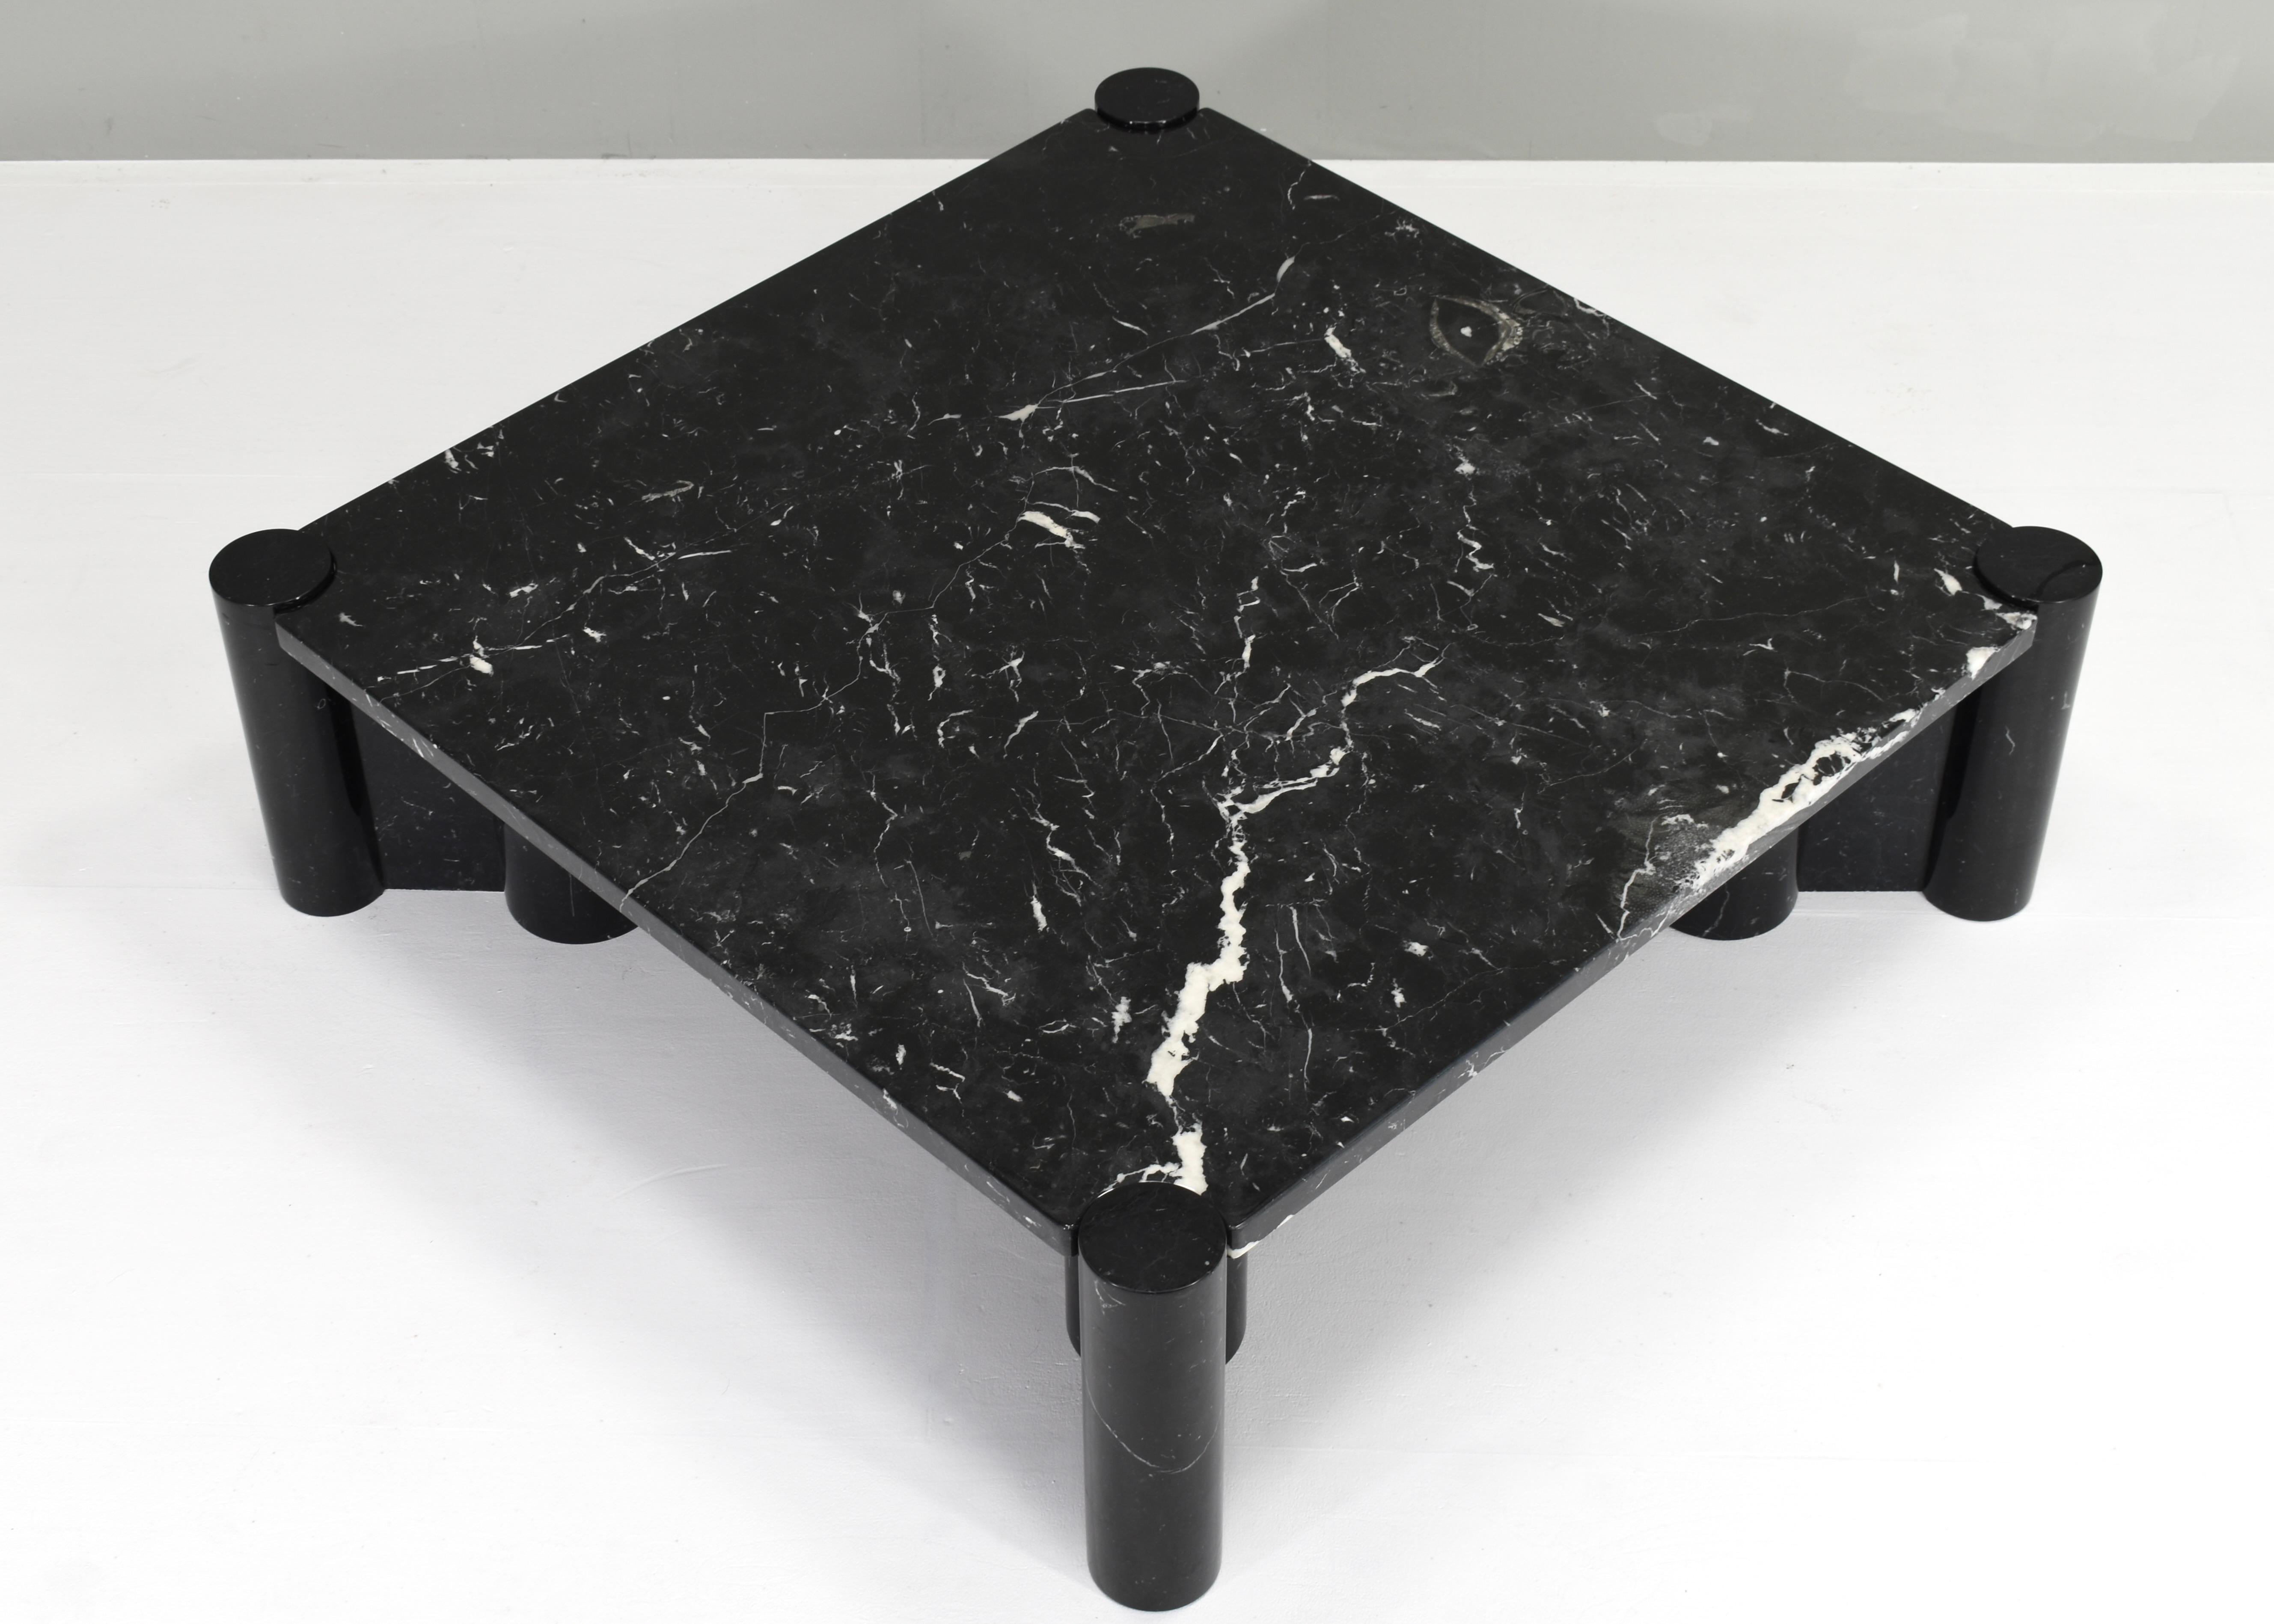 Gae Aulenti for Knoll ‘Jumbo’ Coffee Table in Nero Marquina Black Marble, Italy  2